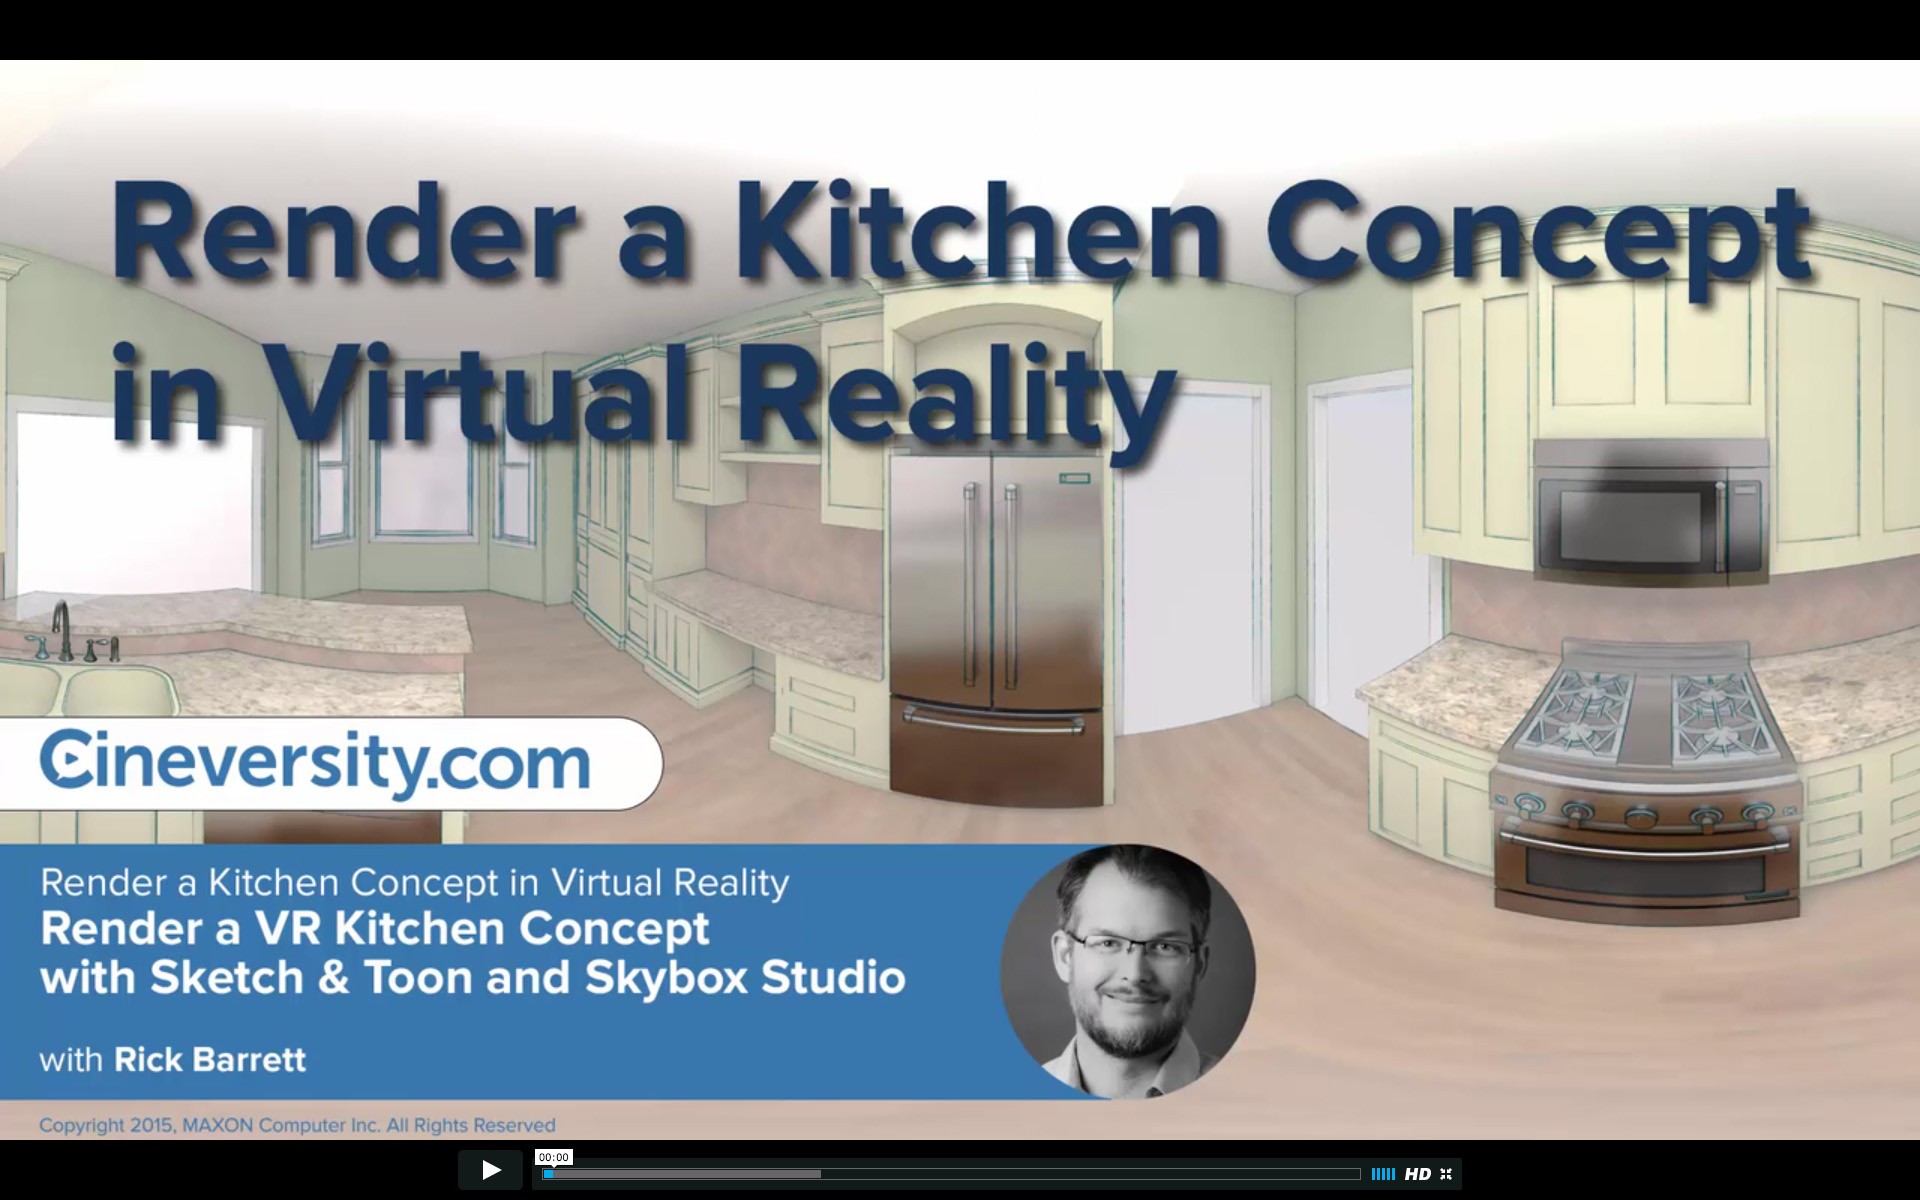 Render a Concept Kitchen in Virtual Reality